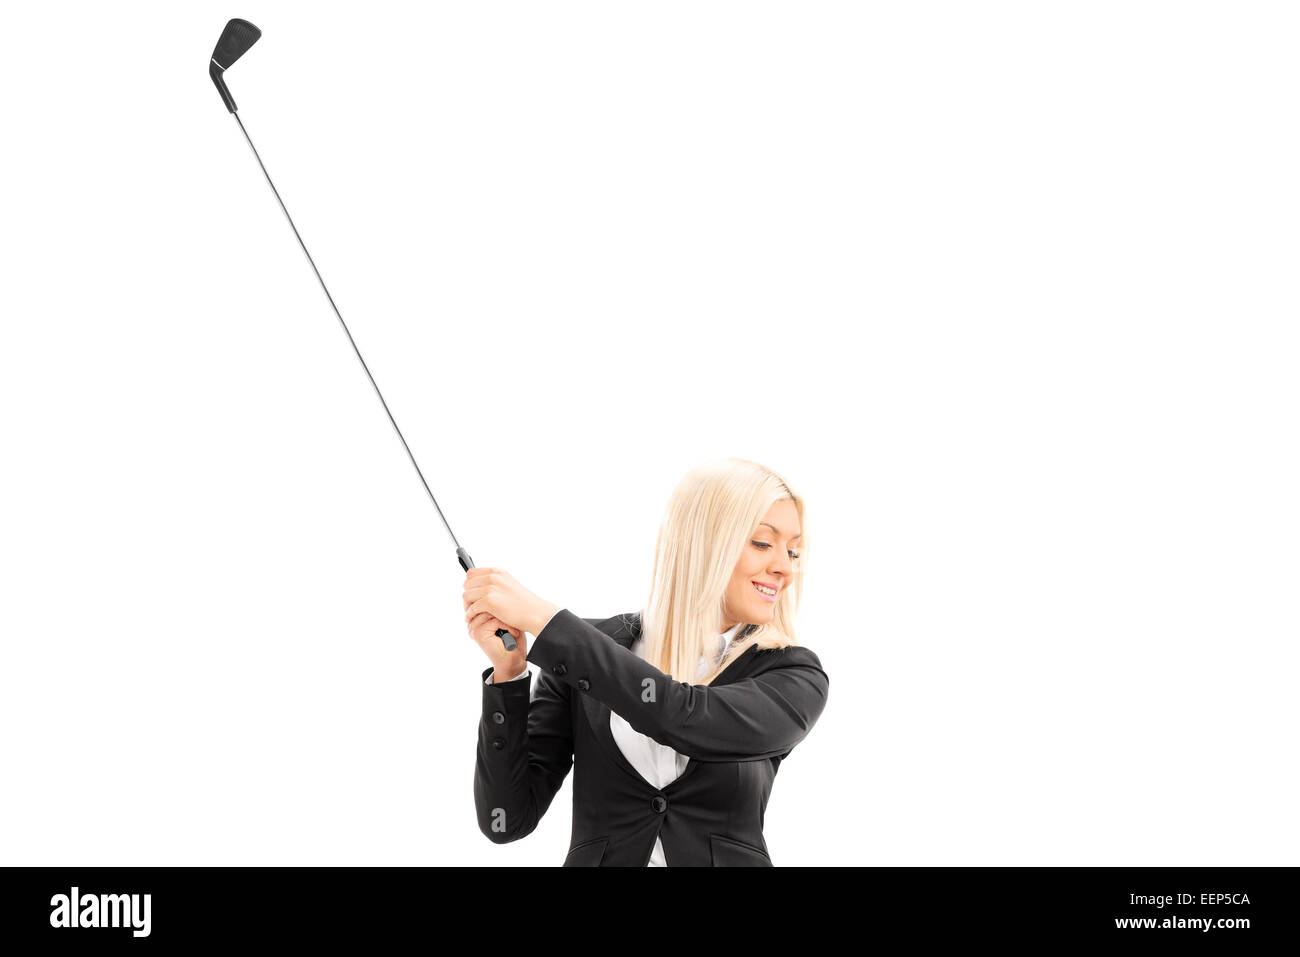 Businesswoman swinging a golf club isolated on white background Stock Photo